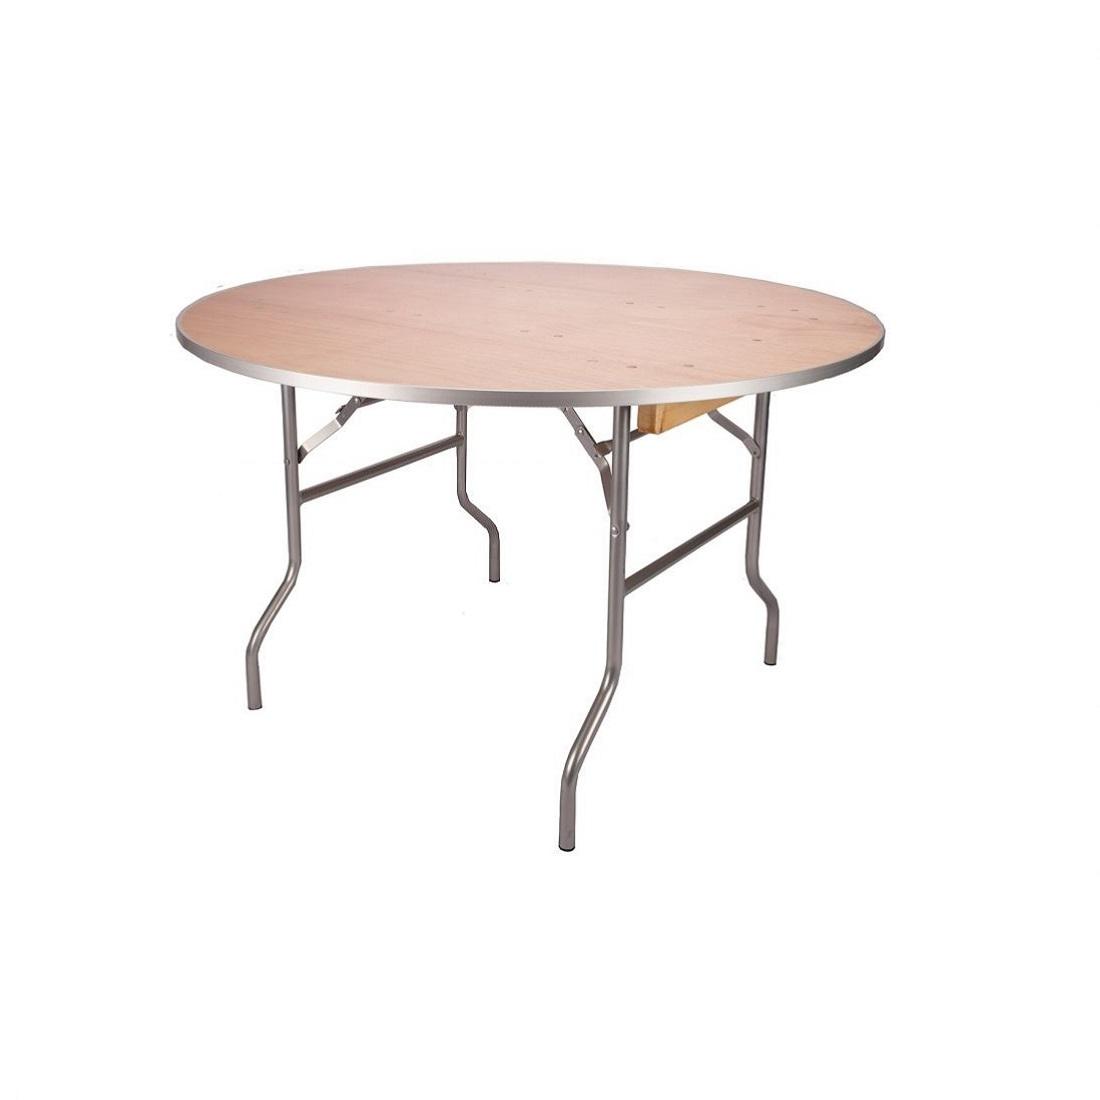 48" Round Wood Table, Table and Tent Rentals